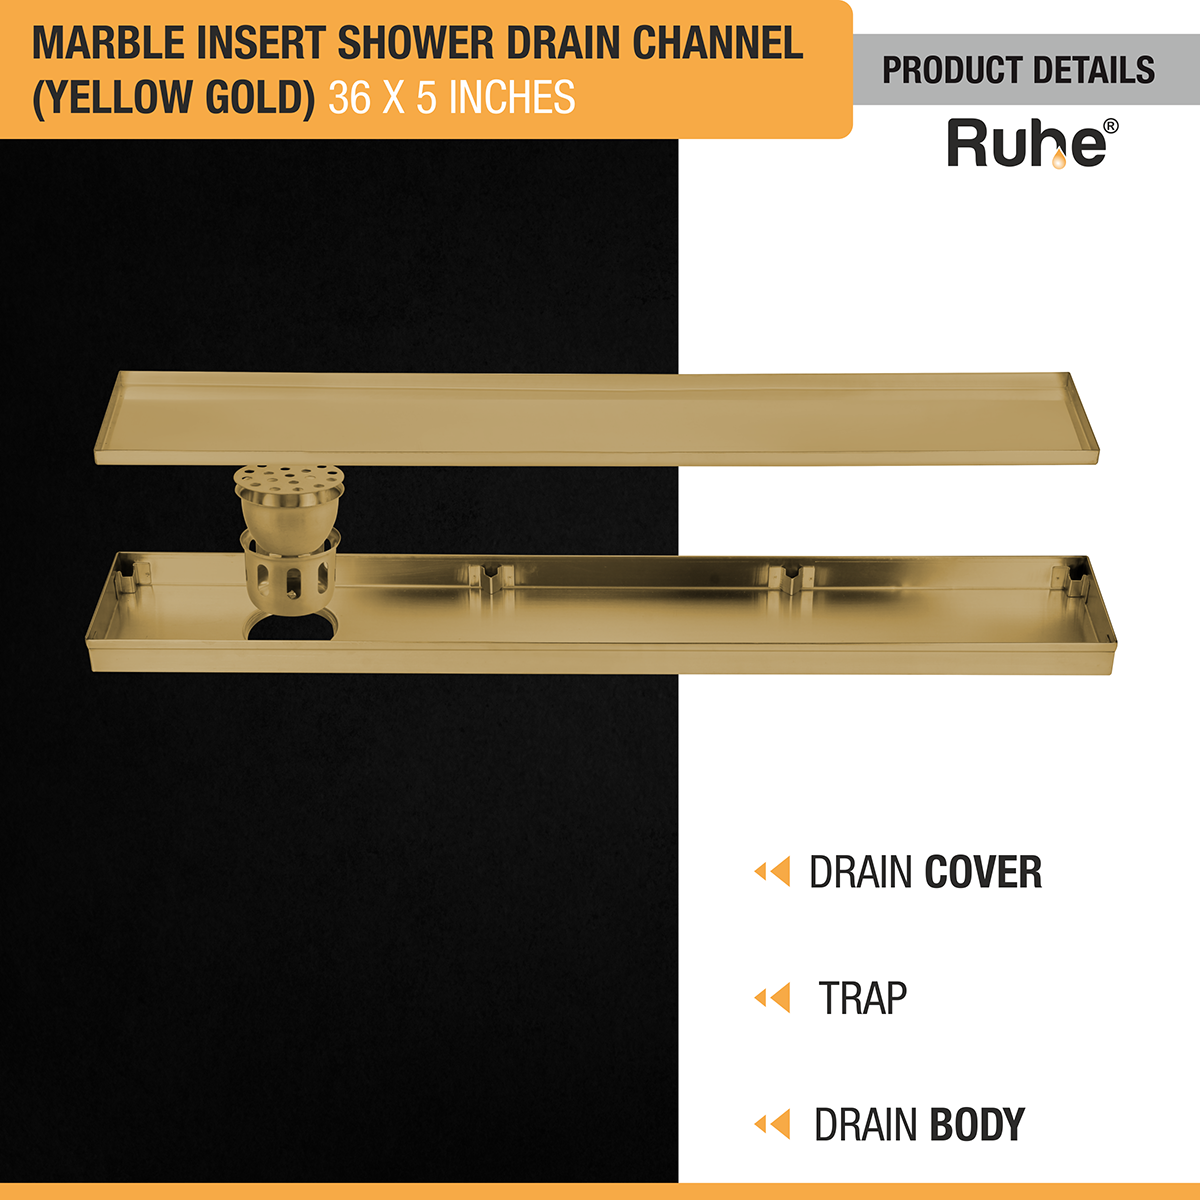 Marble Insert Shower Drain Channel (36 x 5 Inches) YELLOW GOLD PVD Coated drain cover, trap, and drain body